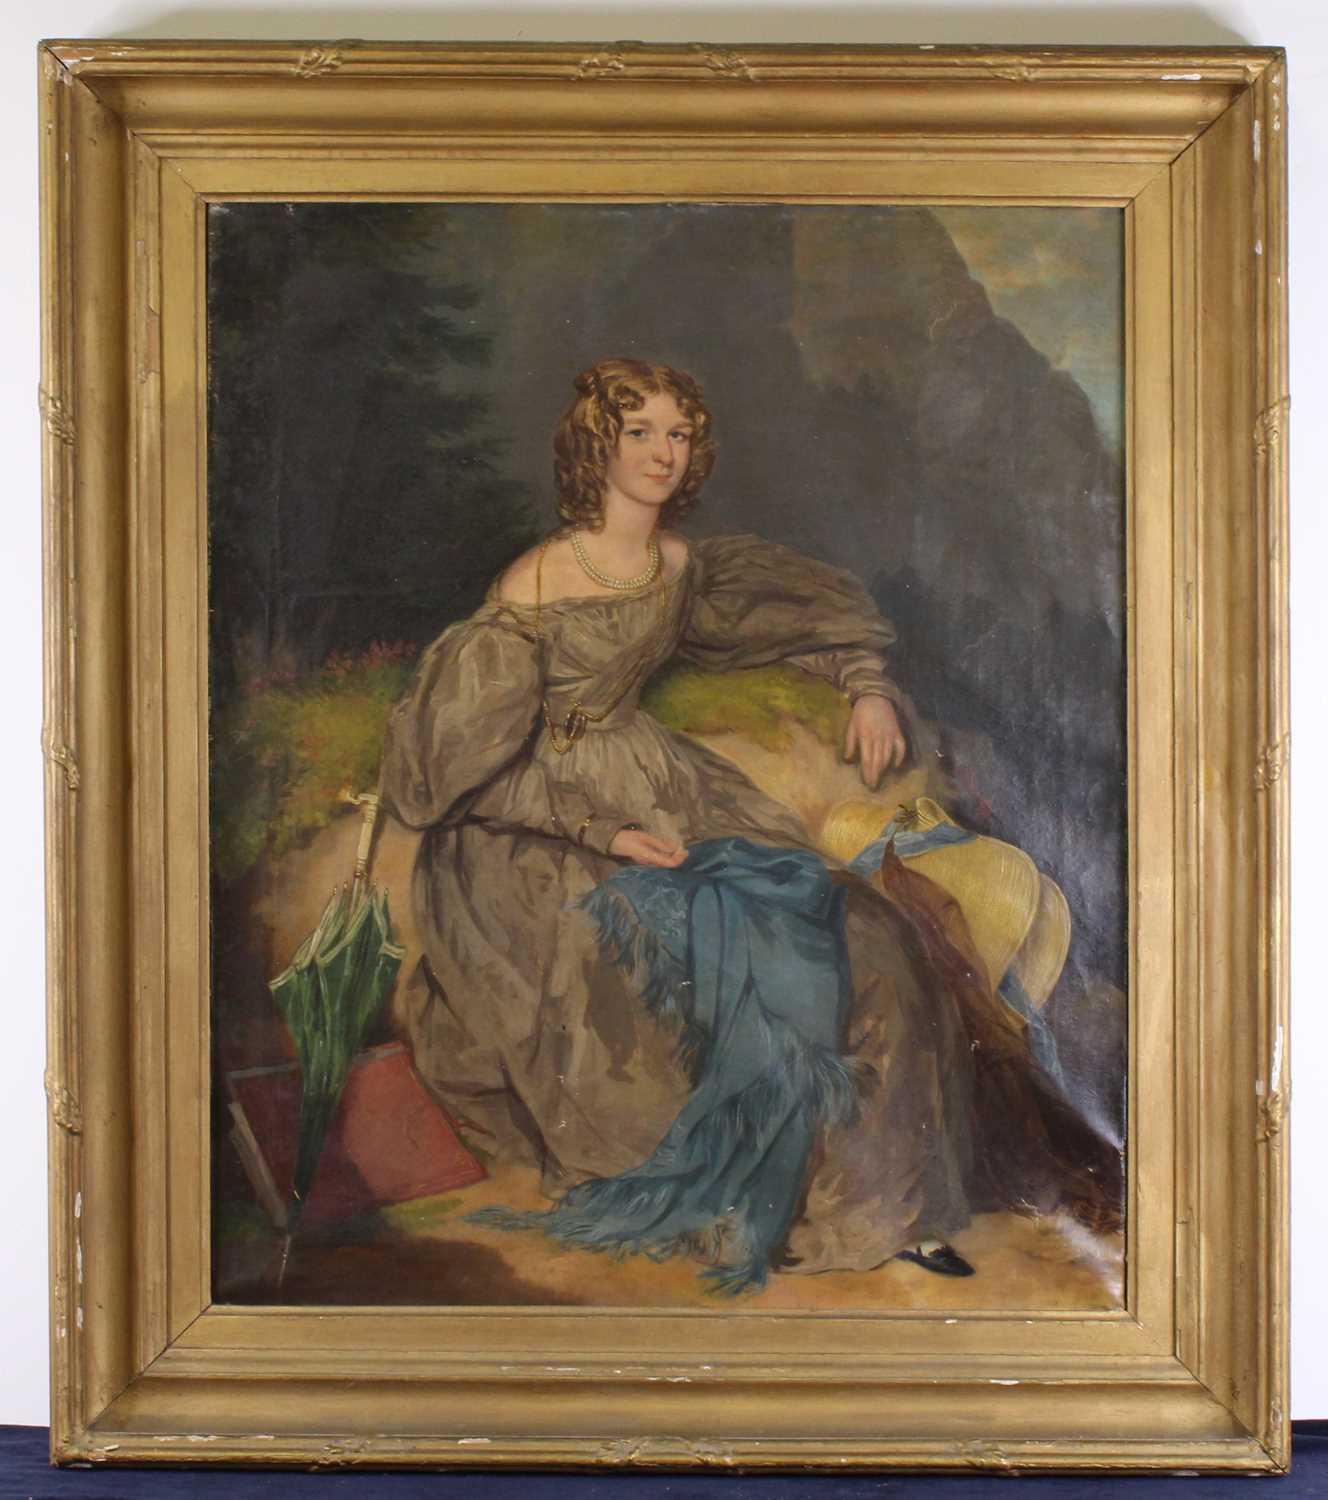 Late 19th century English school - full-length portrait of a young woman in a mountain landscape, - Image 2 of 3